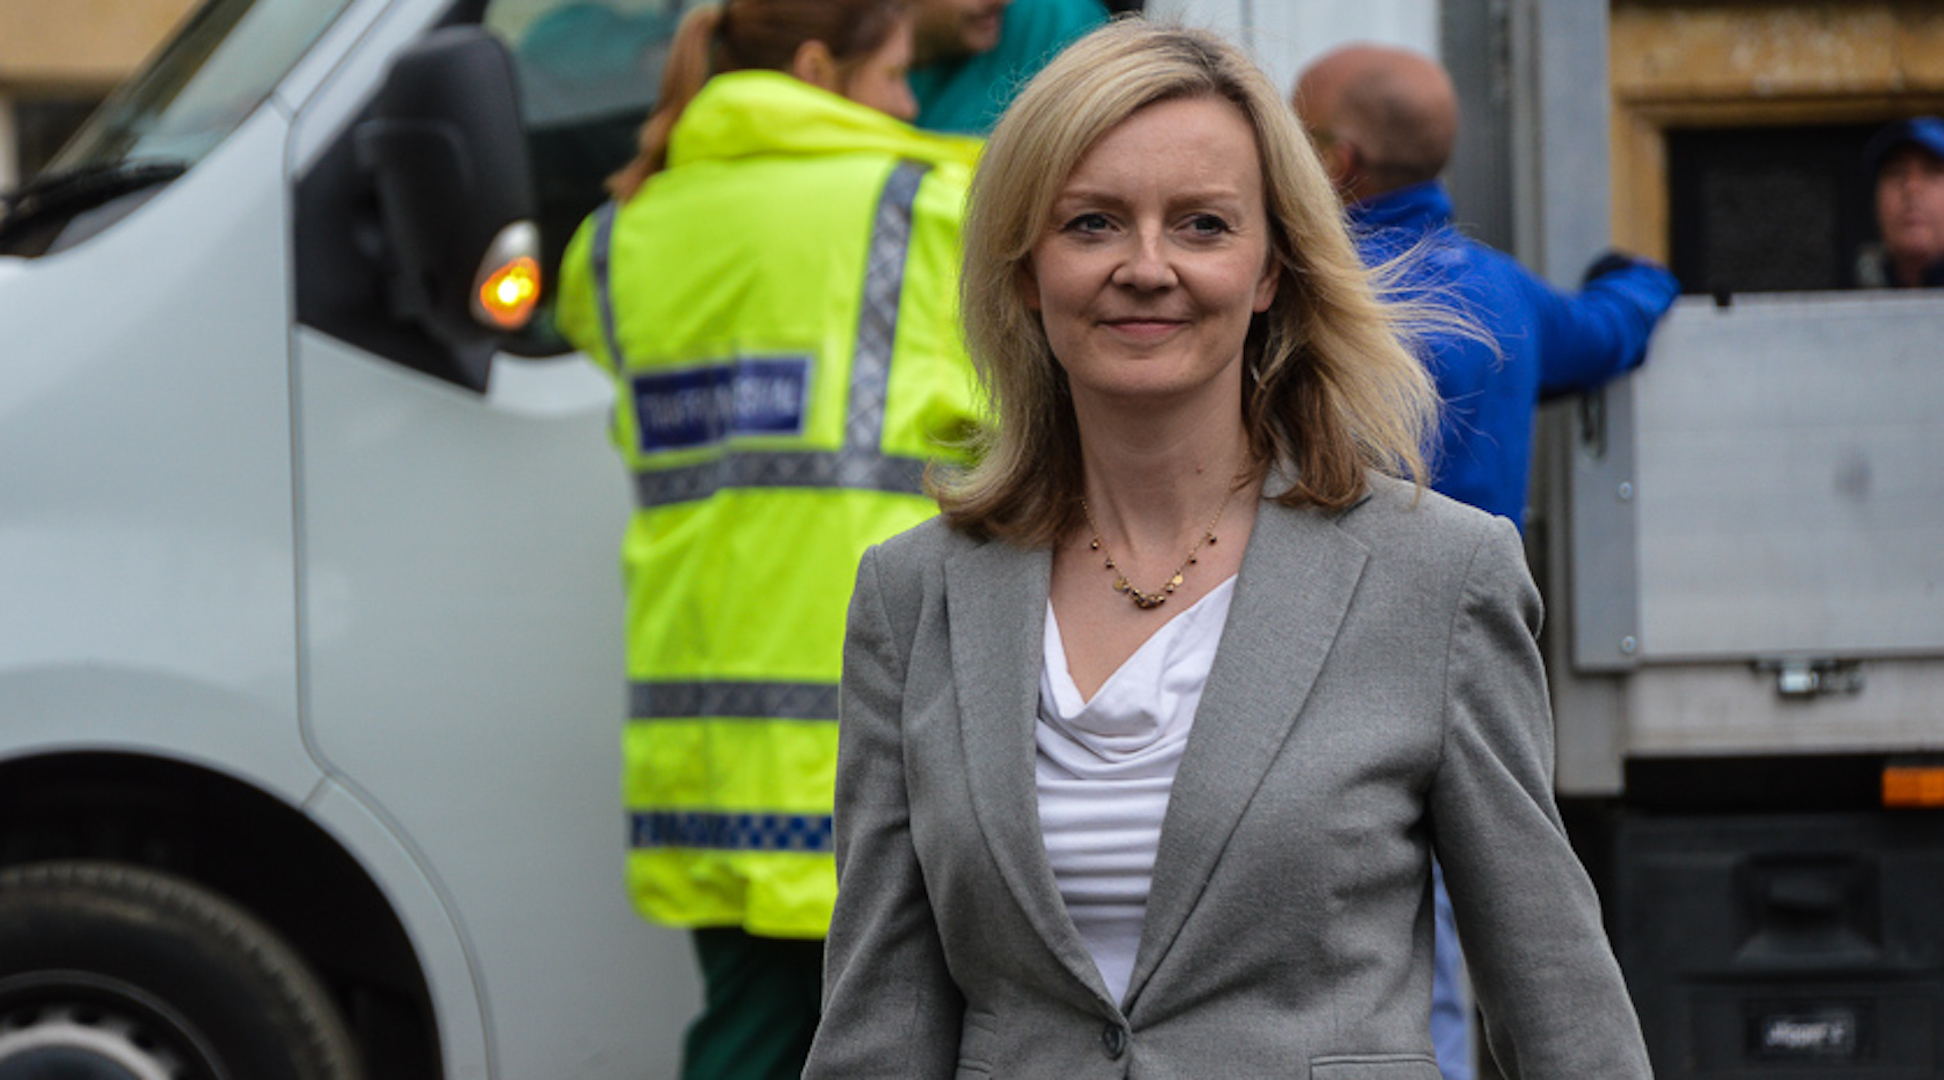 Liz Truss who was named foreign secretary in the cabinet reshuffle